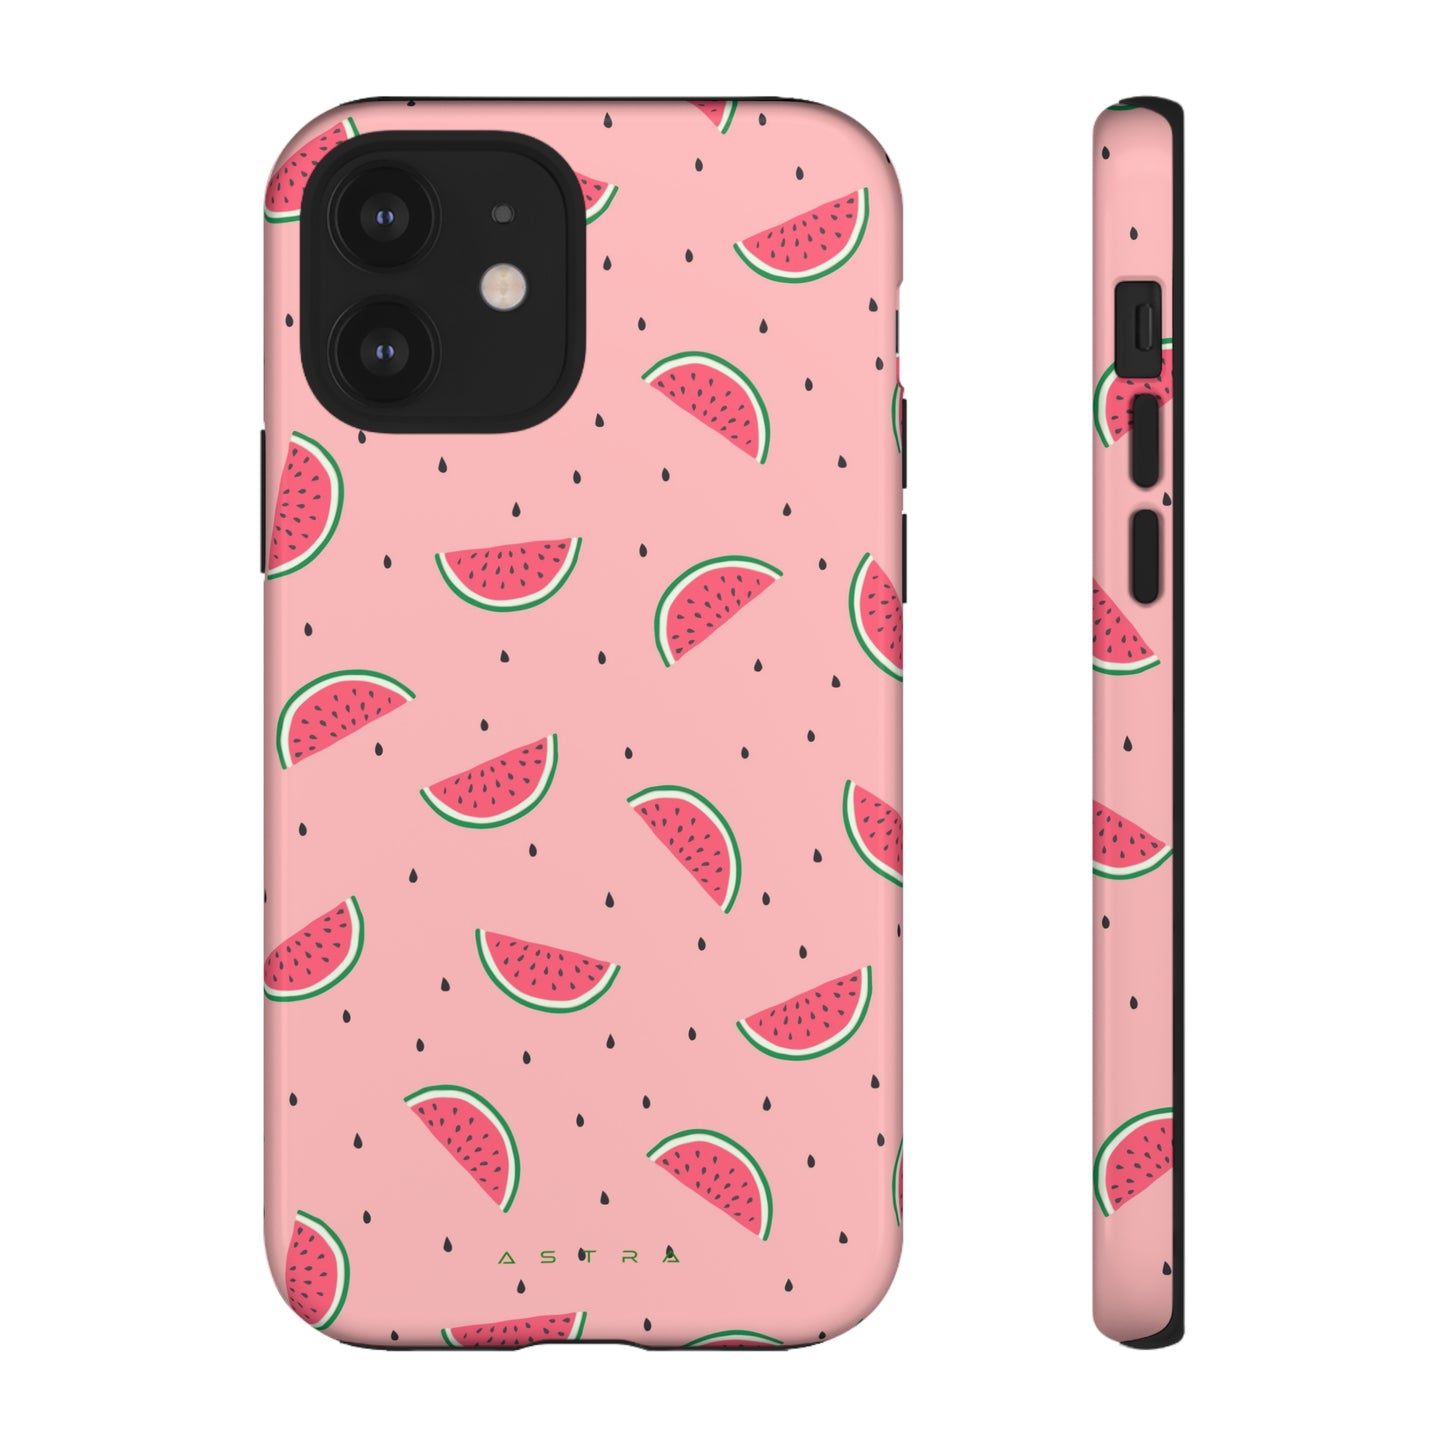 Summer Refresh iPhone 12 Glossy Phone Case Accessories Elite Glossy iPhone Cases Matte mobi Phone accessory Phone Cases Samsung Cases Valentine's Day Picks